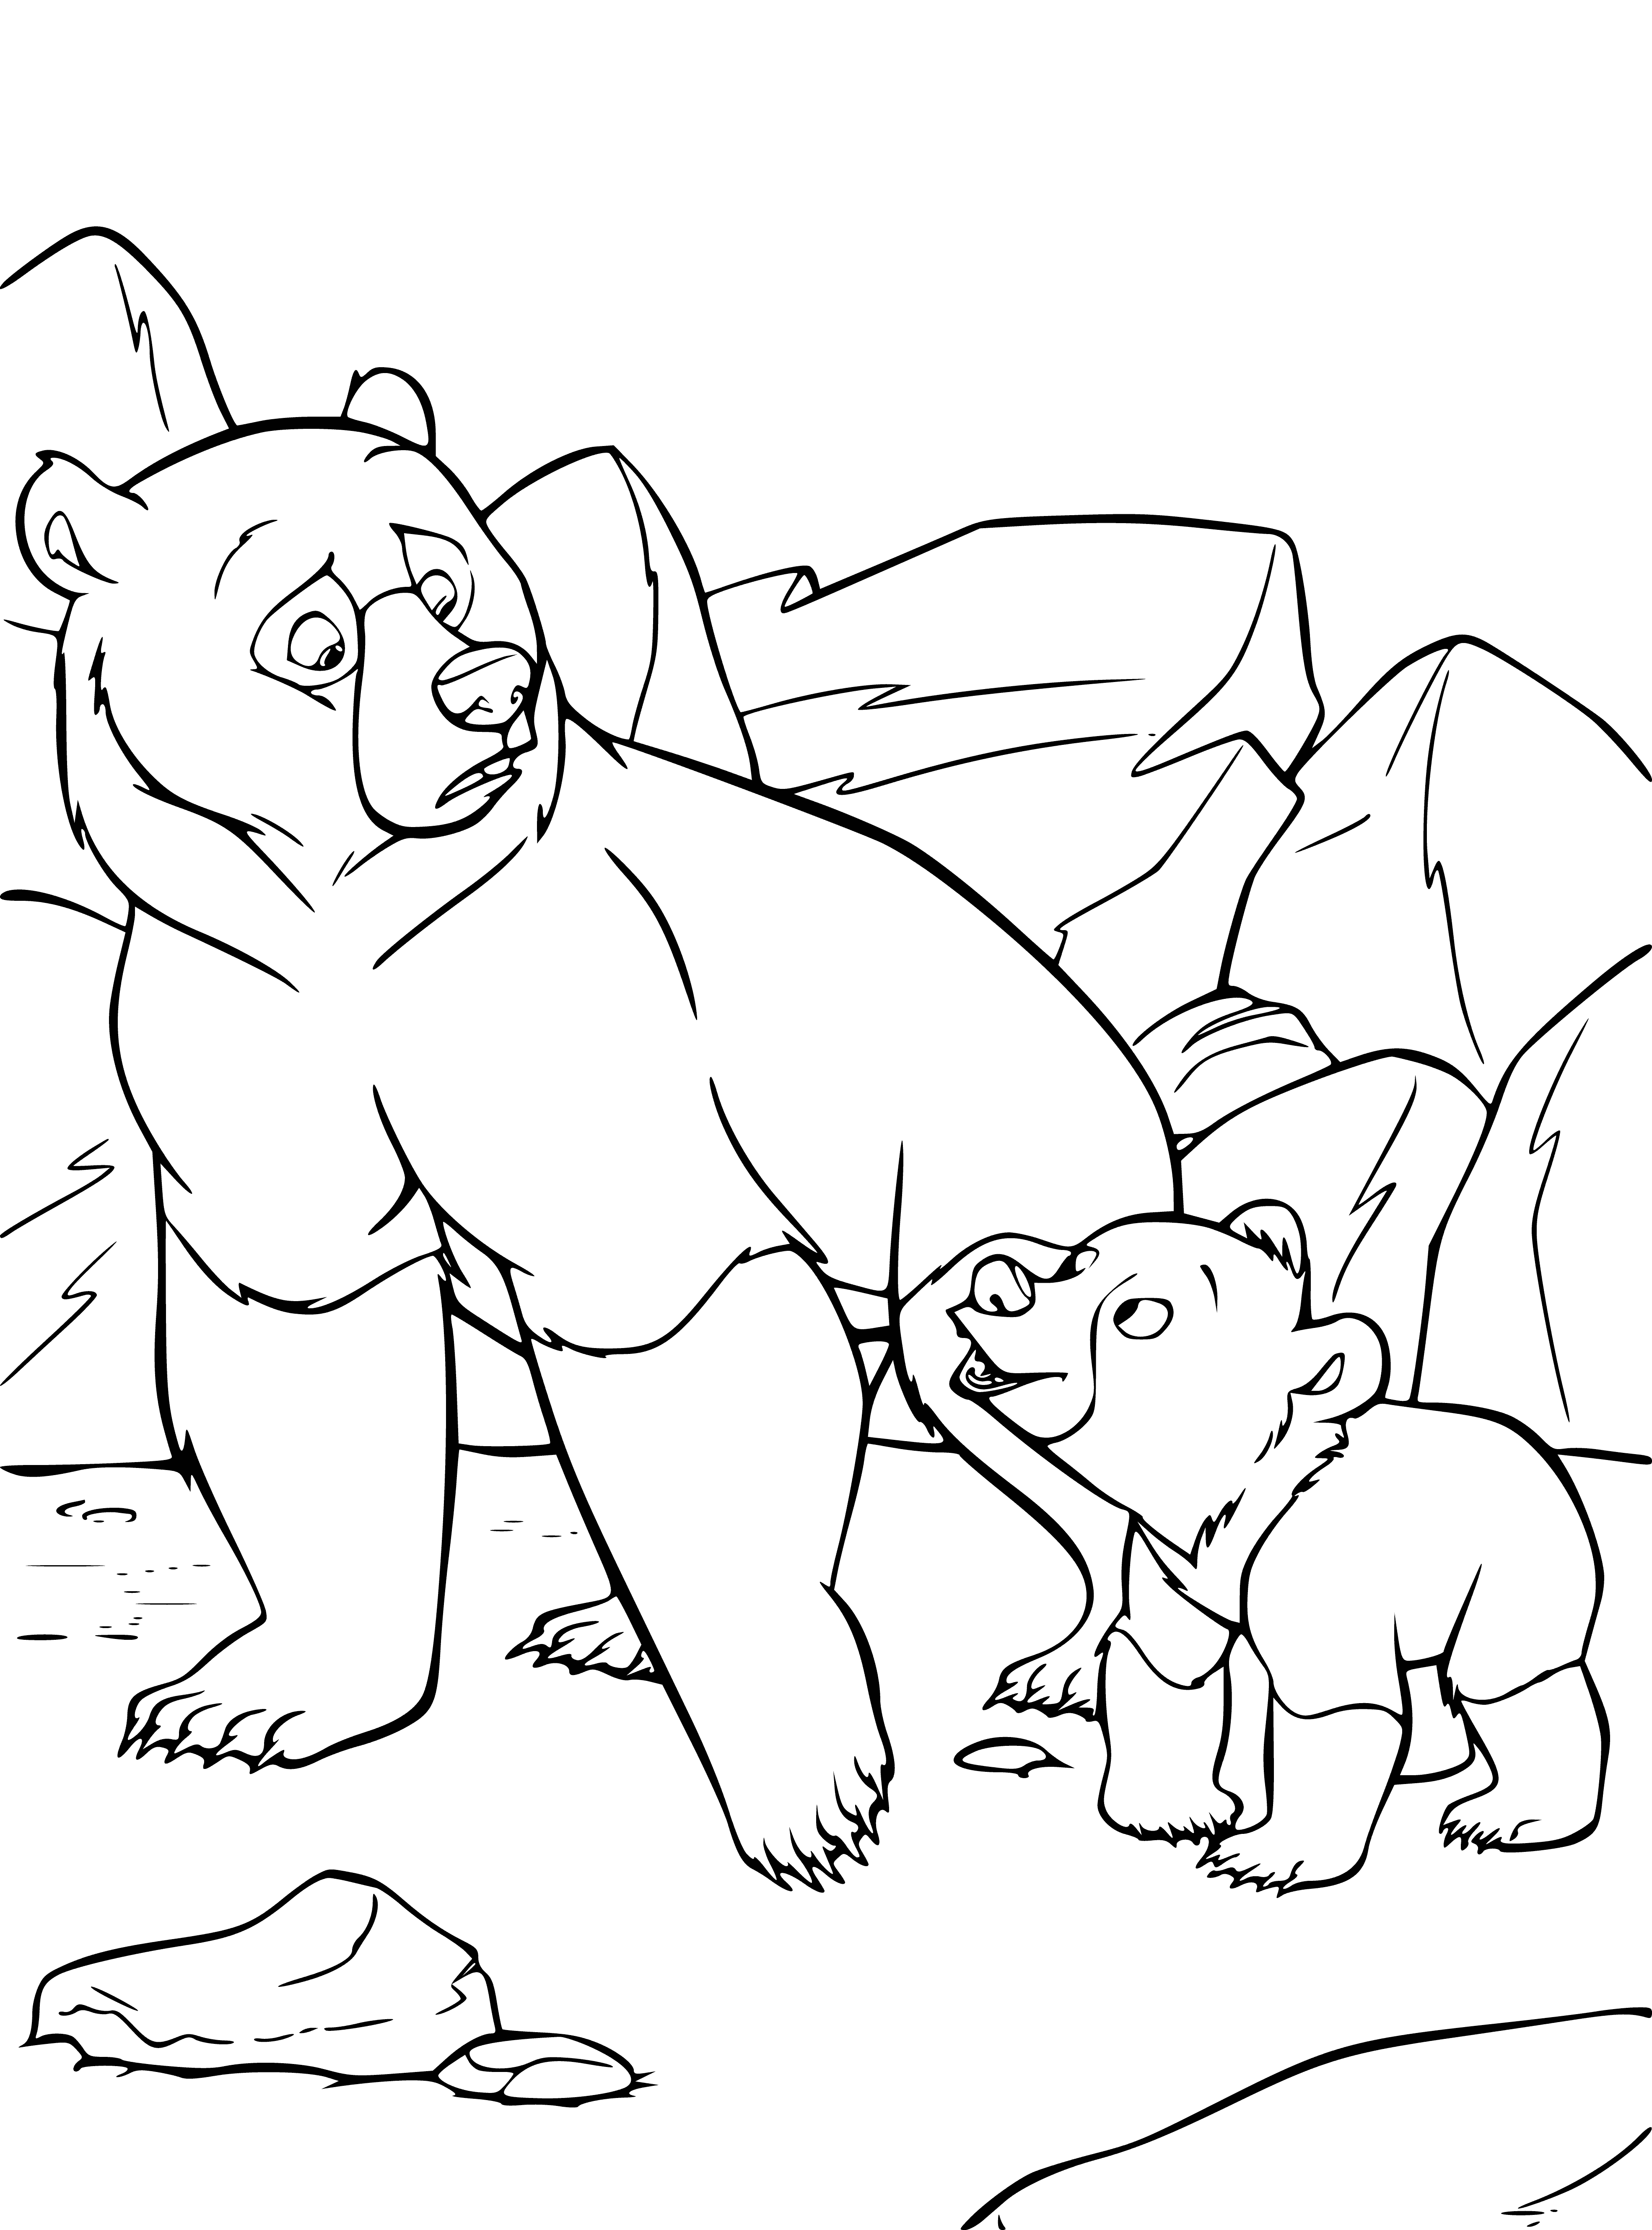 coloring page: A large brown bear fishes in a river with its paw, a cub on its back holding its fur. #AnimalParents